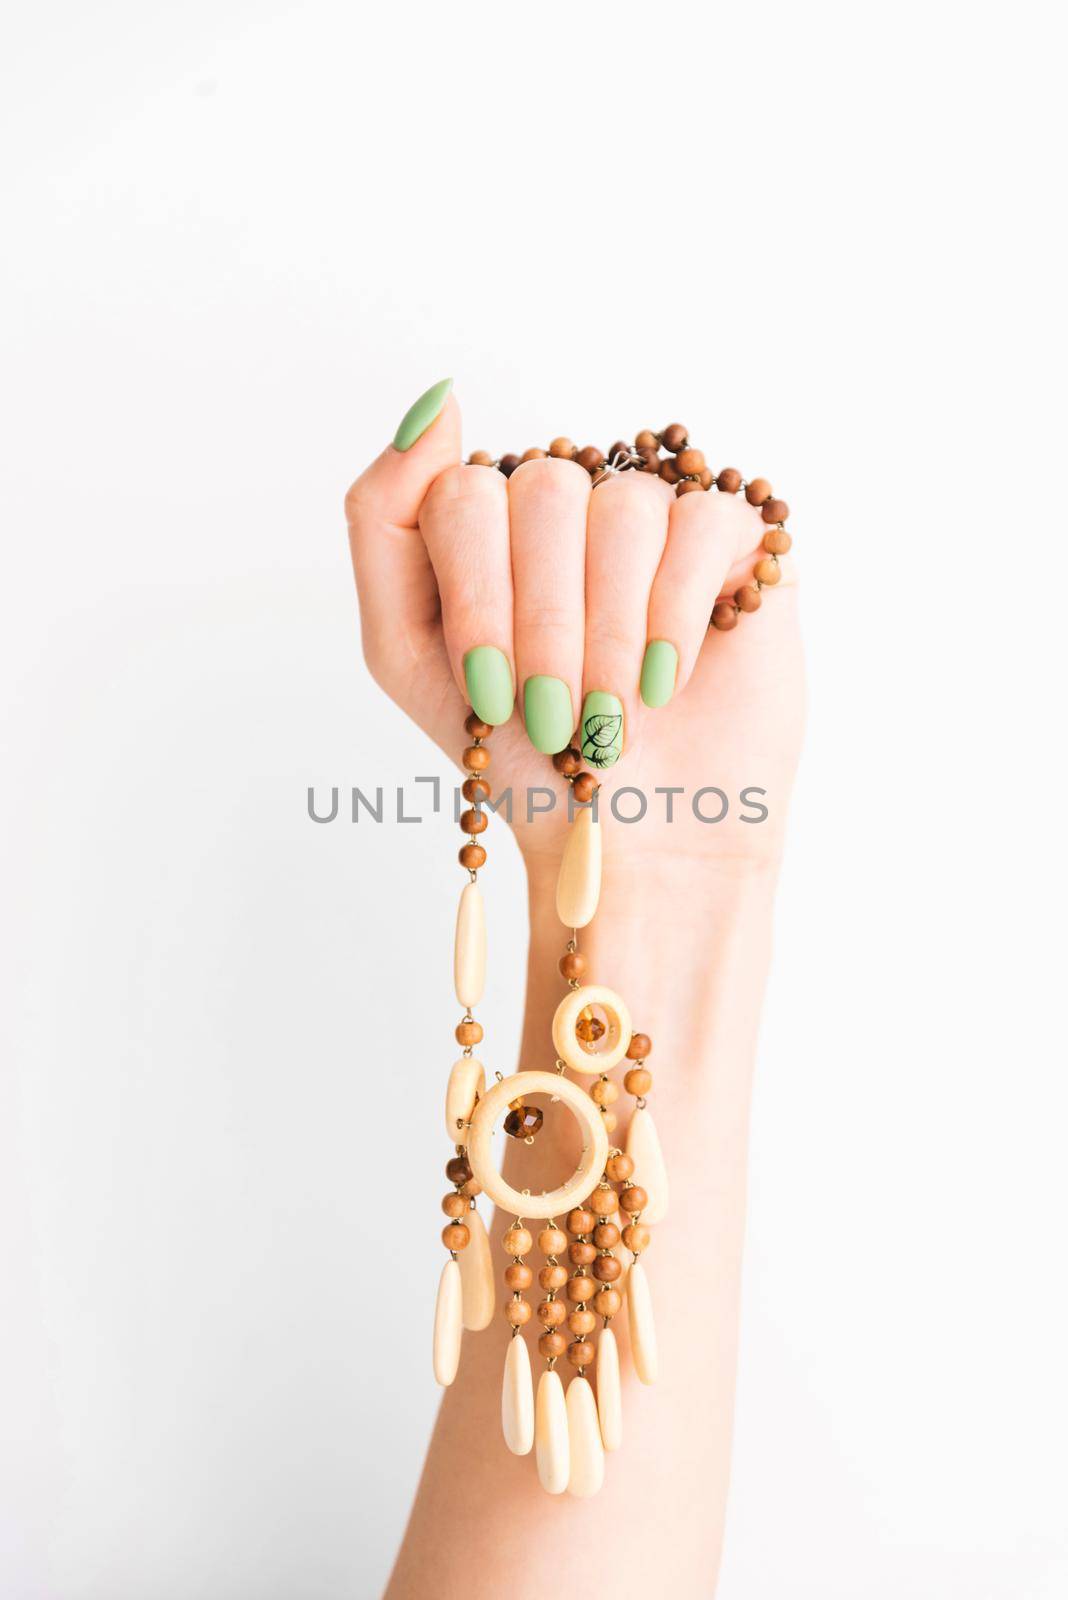 Female hand with green manicure holding wooden necklace. by alexAleksei